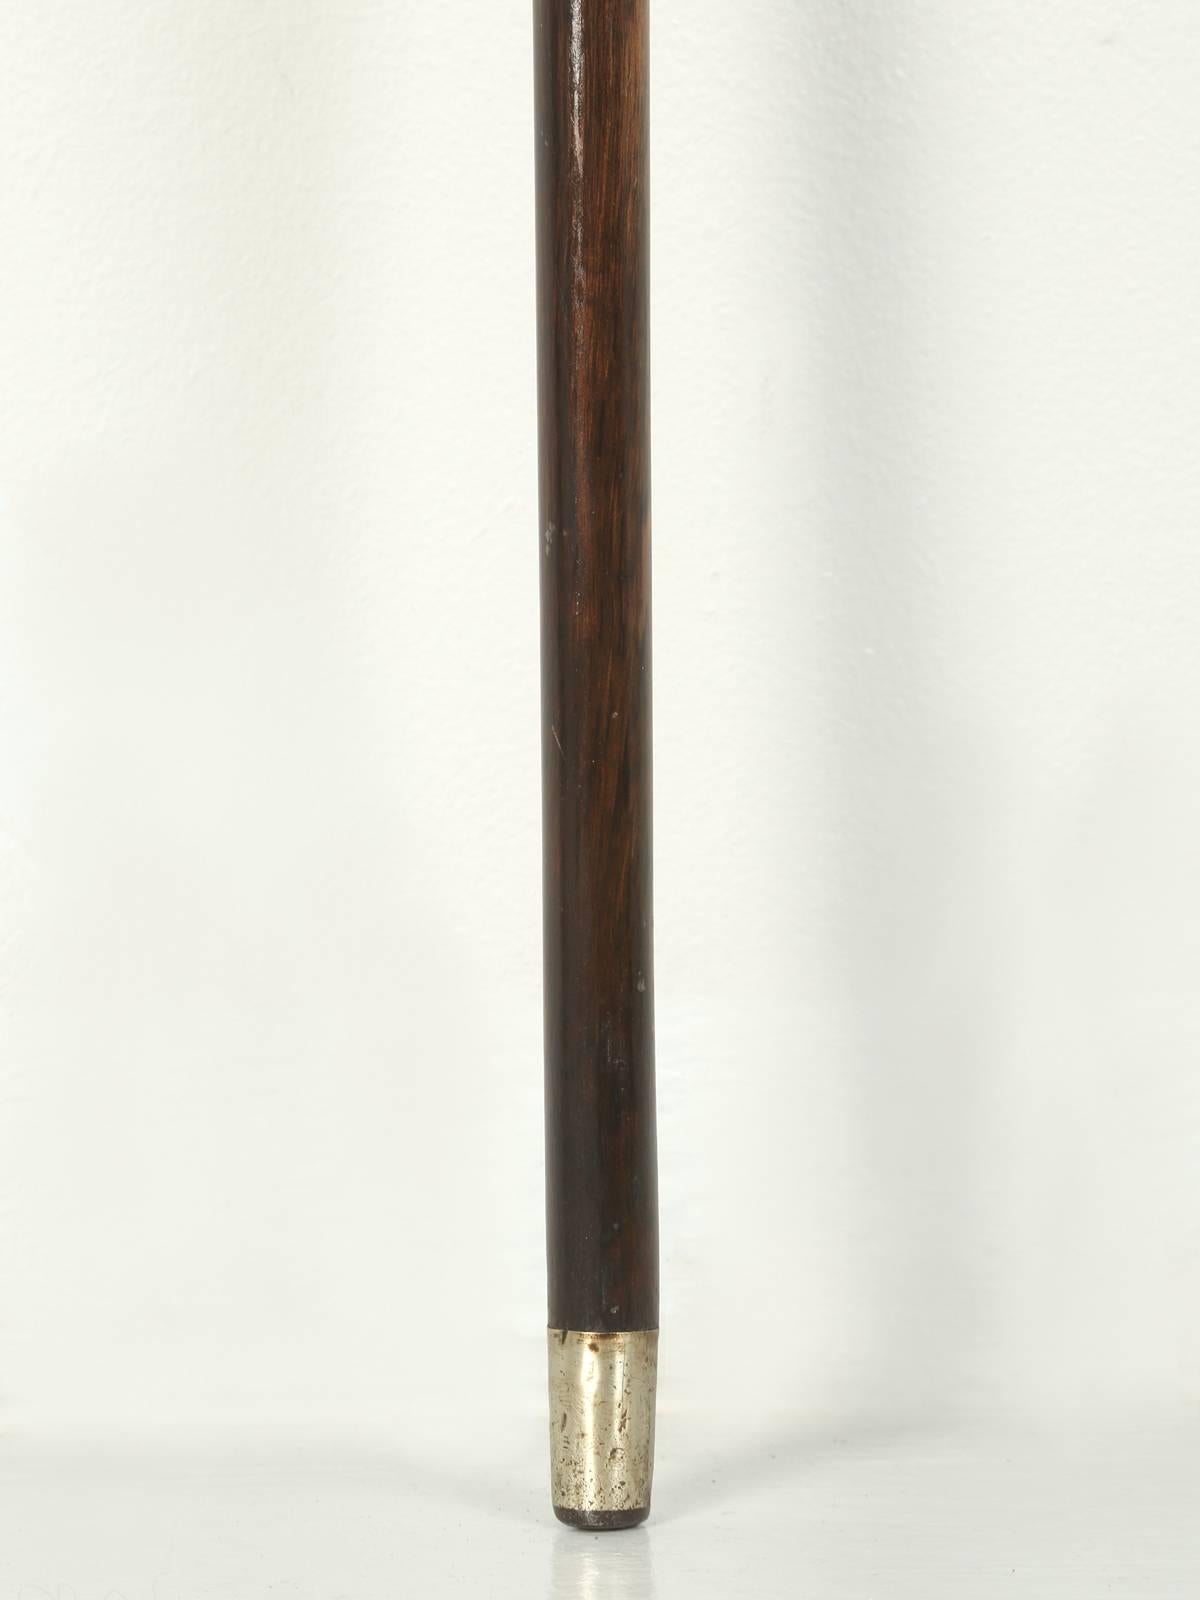 Antique French Walking Stick, or Cane with Silver Inlays 5